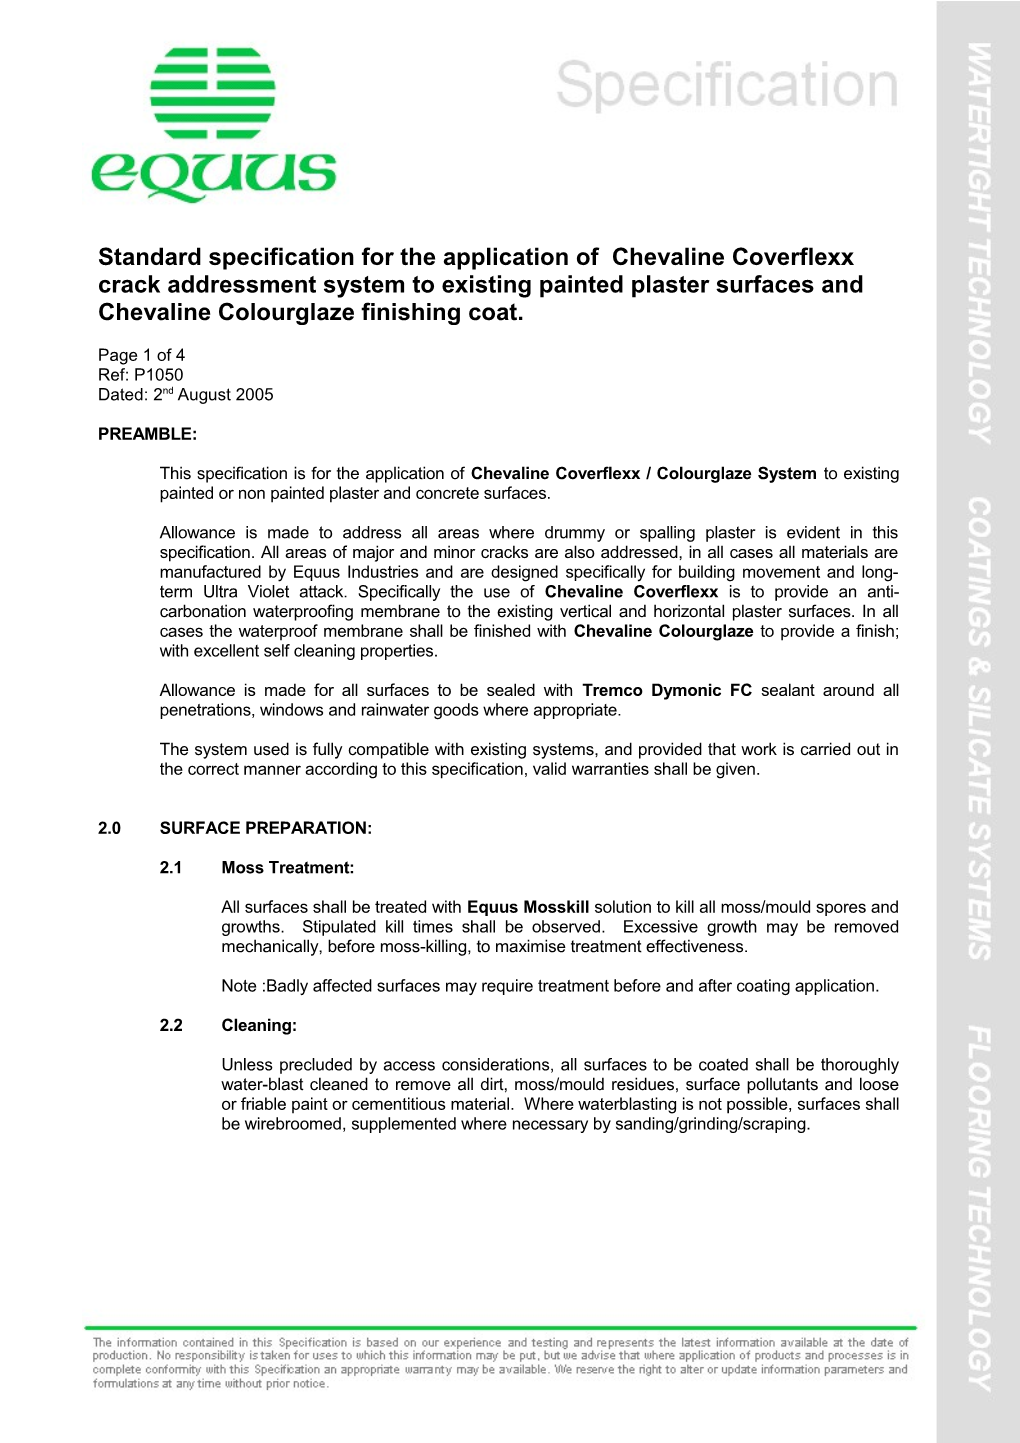 Standard Specification for the Application of Chevaline Coverflexx Crack Addressment System